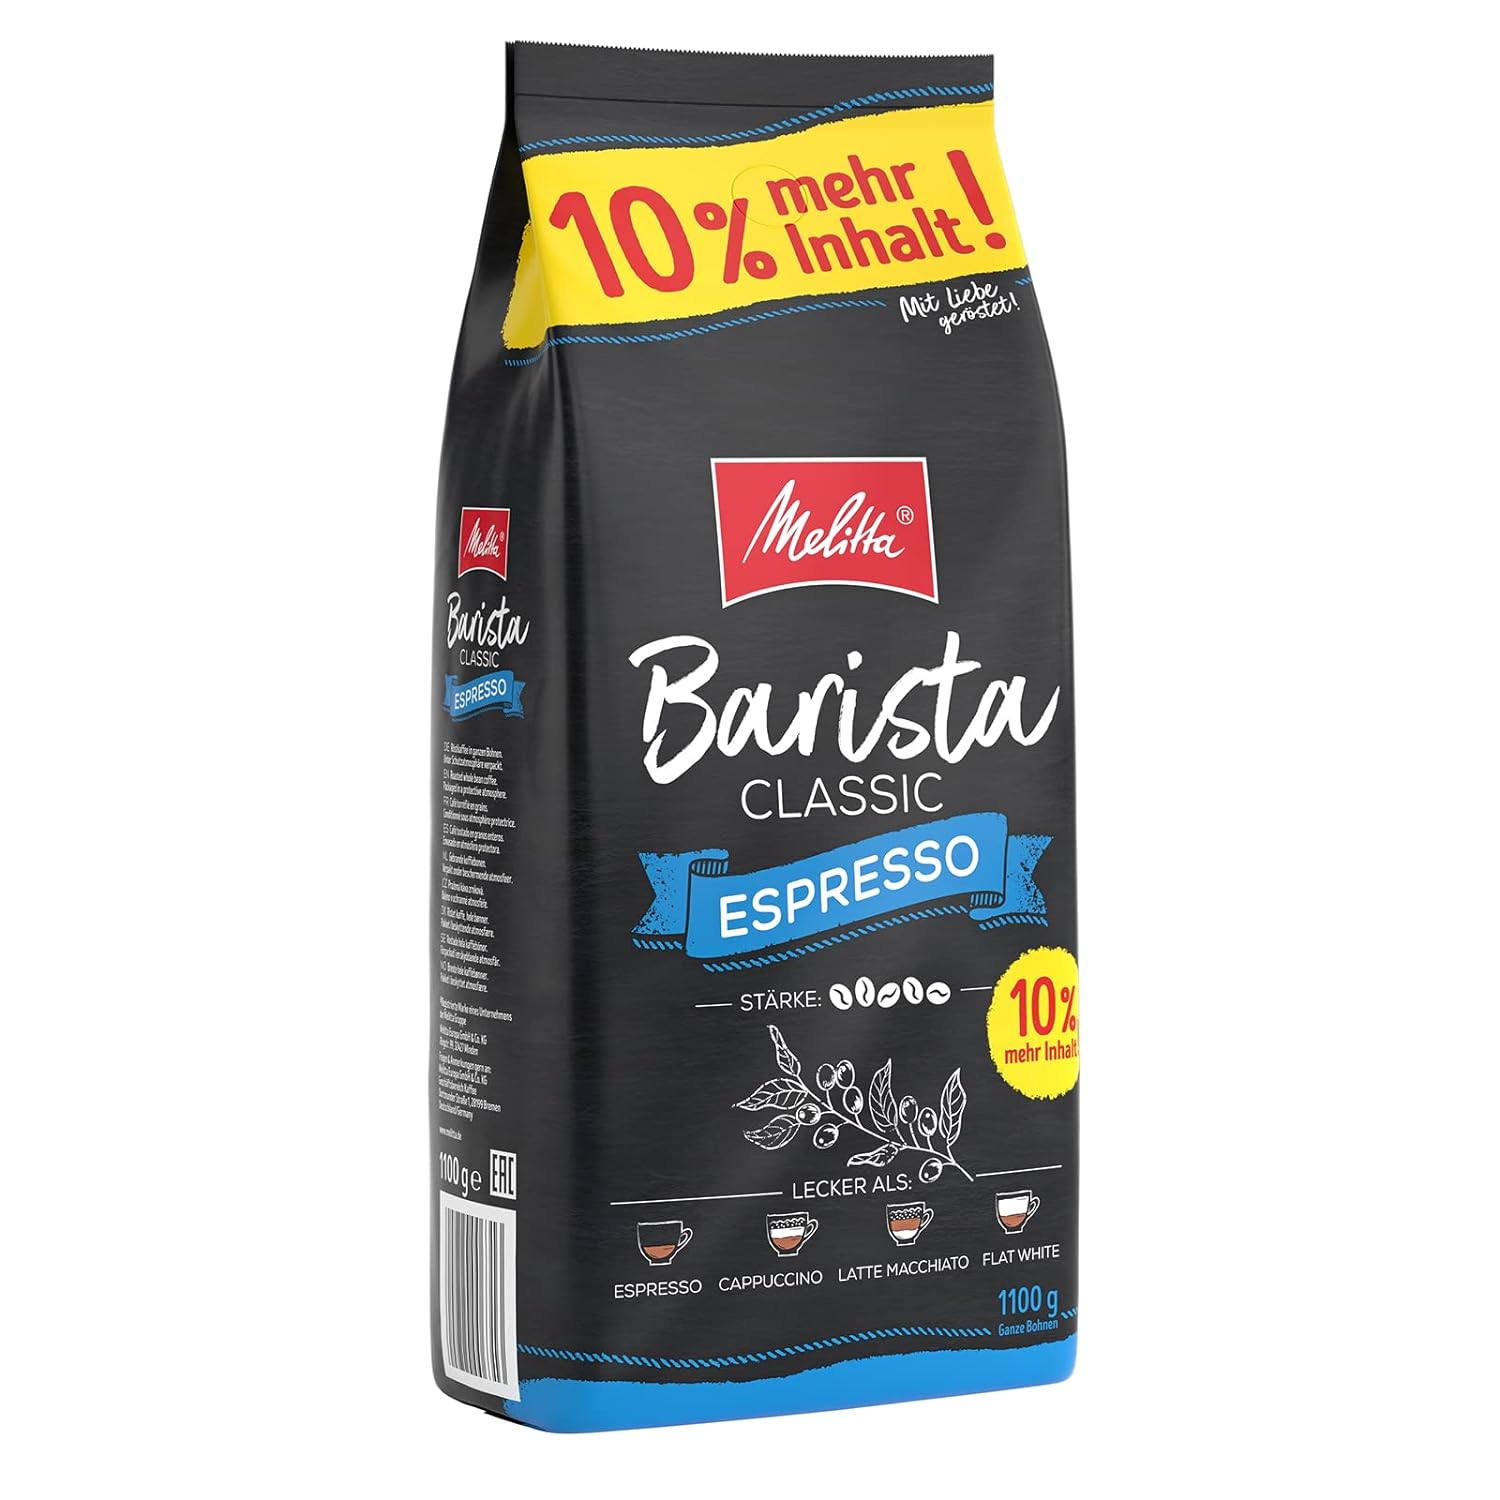 Melitta Barista Classic Espresso, Whole Coffee Beans 1.1 kg, Unground, Coffee Beans for Fully Automatic Coffee Machine, Strong Roast, Strength 5